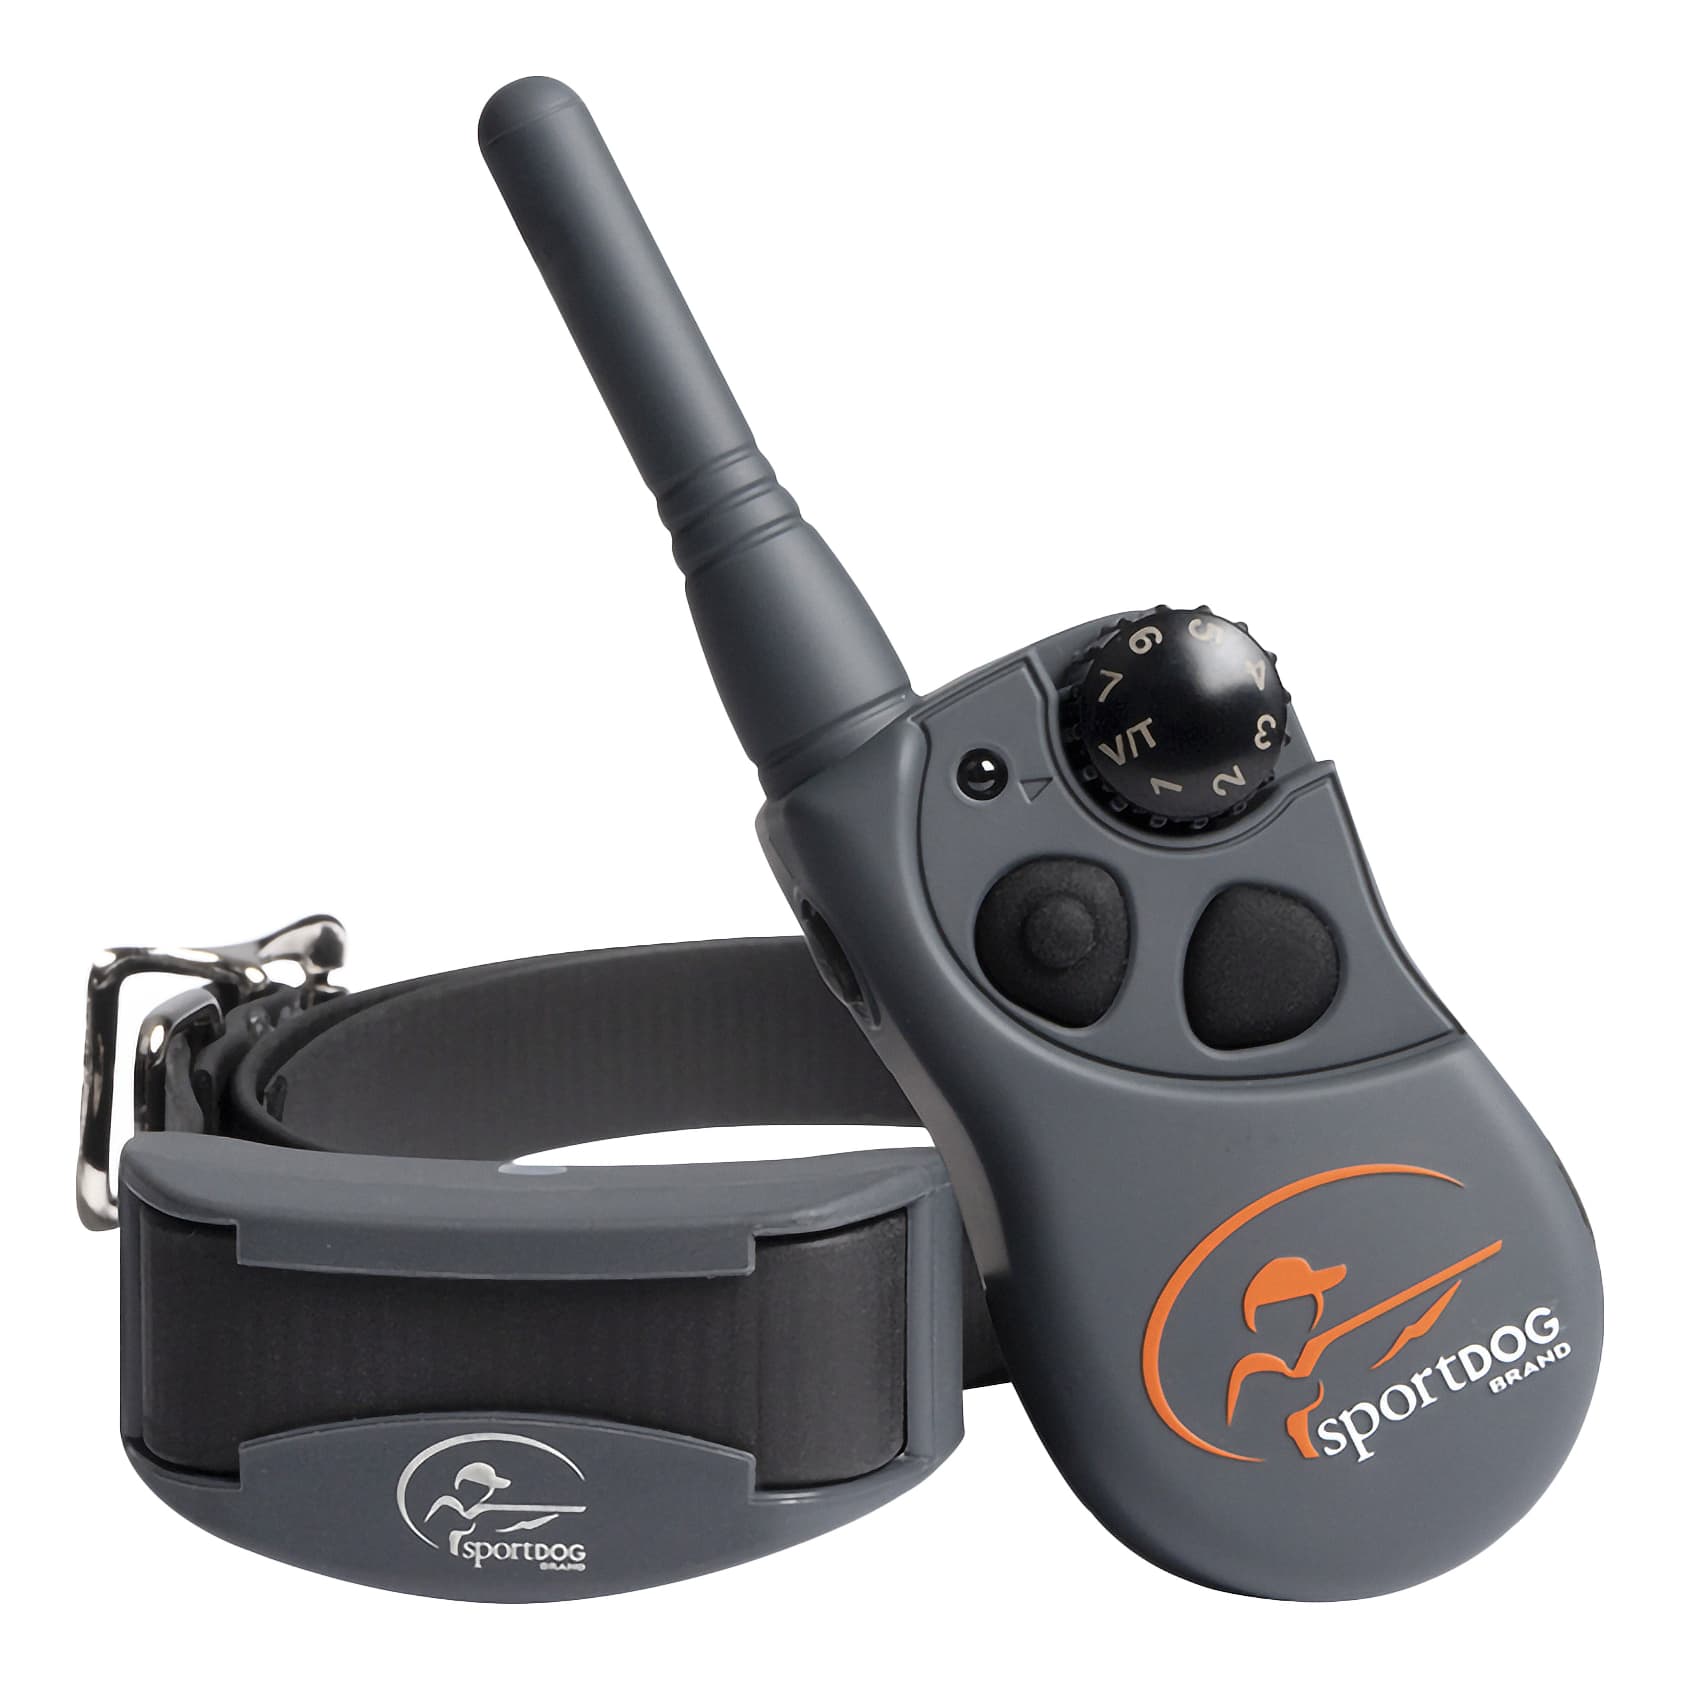 SportDOG Brand SportTrainer 1275 Dog Training Collar - 3/4 Mile Range -  Bright, Easy to Read OLED Screen - Waterproof, Rechargeable Remote Trainer